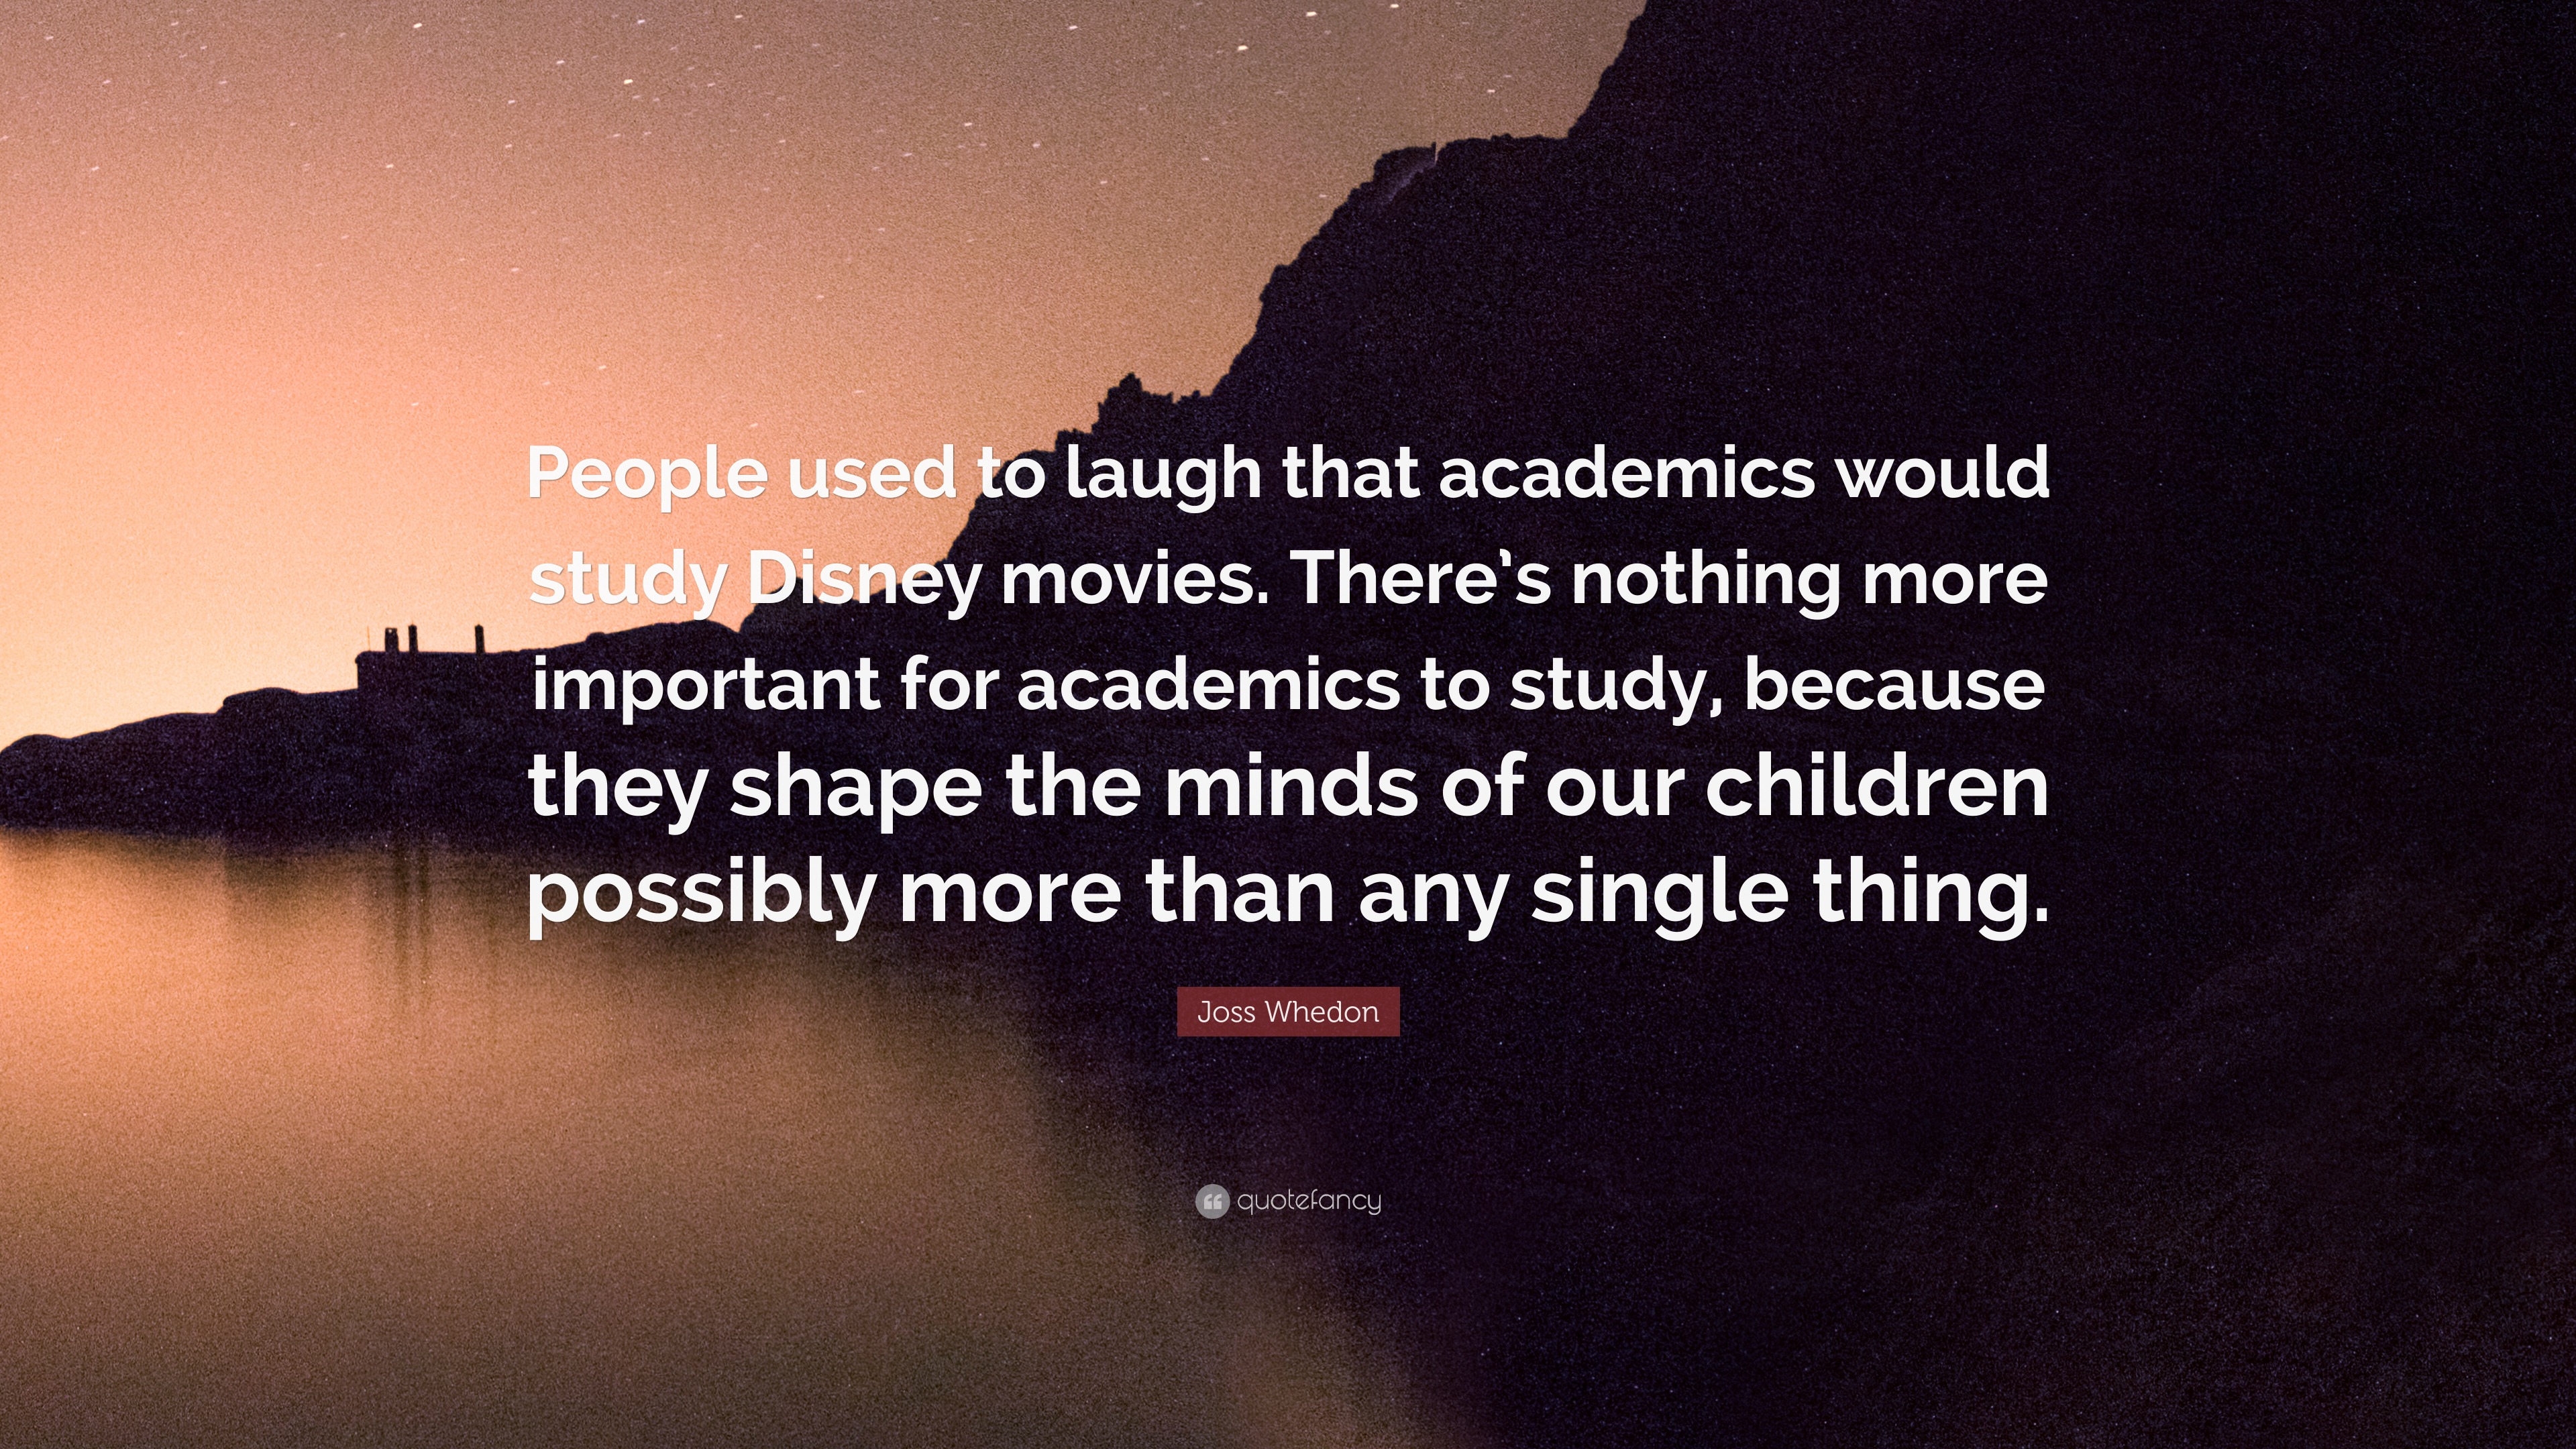 Joss Whedon Quote “People used to laugh that academics would study Disney movies